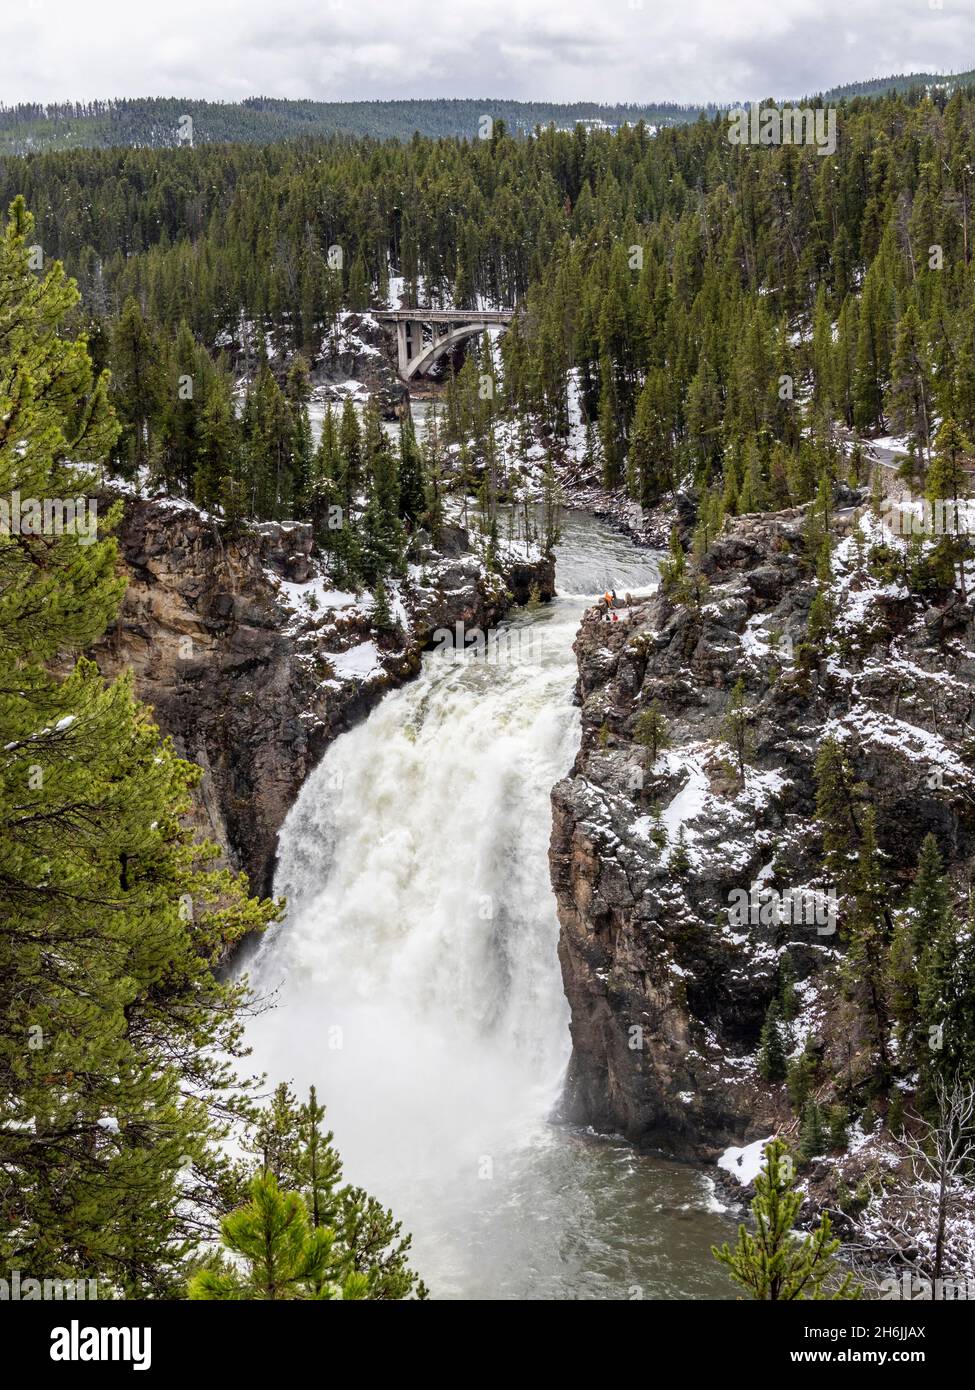 The upper Yellowstone Falls in the Yellowstone River, Yellowstone National Park, UNESCO World Heritage Site, Wyoming, United States of America Stock Photo